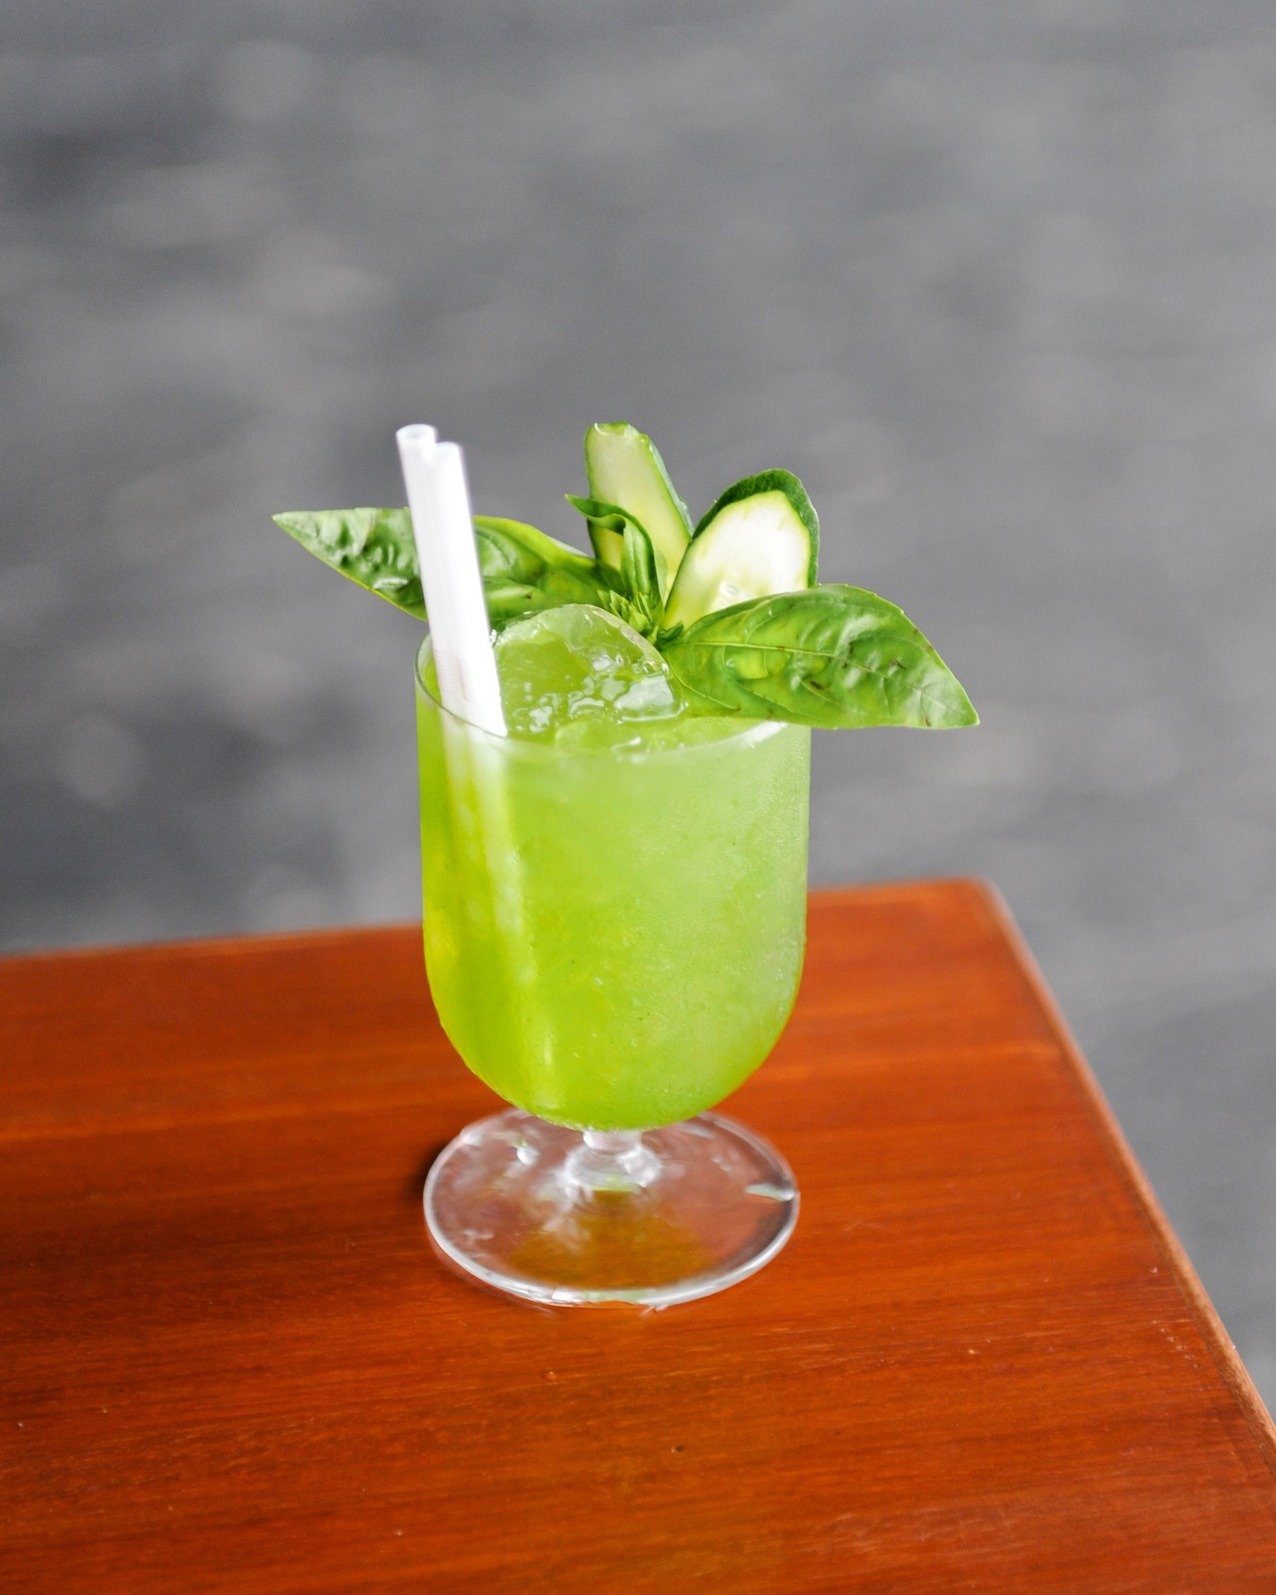 Basil Smash - the perfect cocktail to beat the afternoon heat but really, it&rsquo;s perfect any time and any day.

Fresh sweetness of basil leaves and tangy lemon builds on the botanical notes of gin. Garnished with thin slices of cucumber for a ref